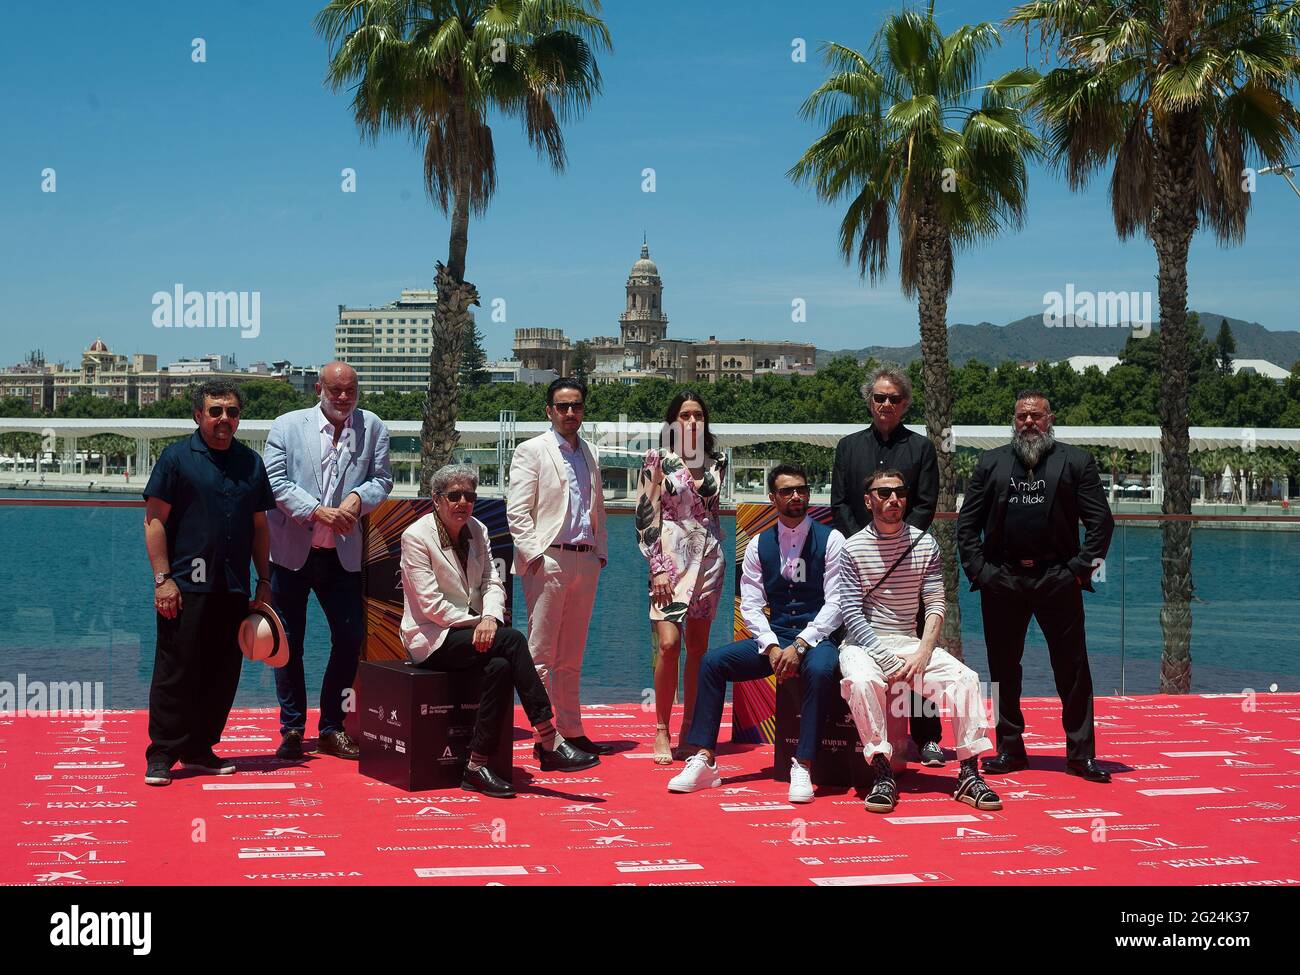 Malaga, Spain. 08th June, 2021. Cast members poses for photos at the photocall of the film “Hombre “muerto no sabe vivir”.The new edition of the 24th Malaga Spanish Film Festival, great cinematographic event in Spain, present the films candidates to win the 'Biznaga de Oro' prize, following all measures to prevent the spread of coronavirus and to guarantee a secure event. The festival will be held from 3 to 13 June. (Photo by Jesus Merida/SOPA Images/Sipa USA) Credit: Sipa USA/Alamy Live News Stock Photo